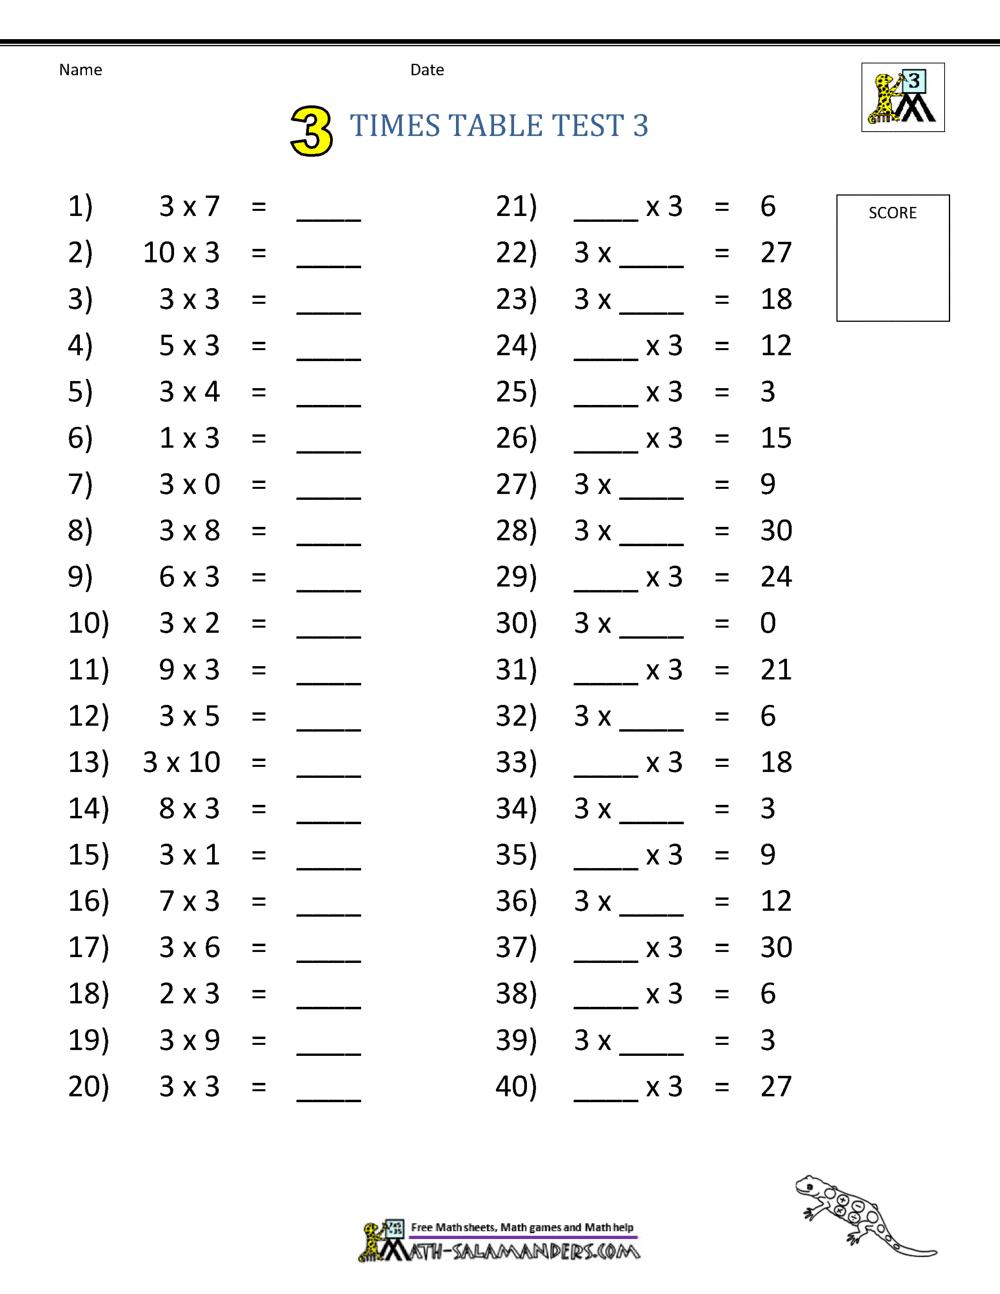 times-table-tests-2-3-4-5-10-times-tables